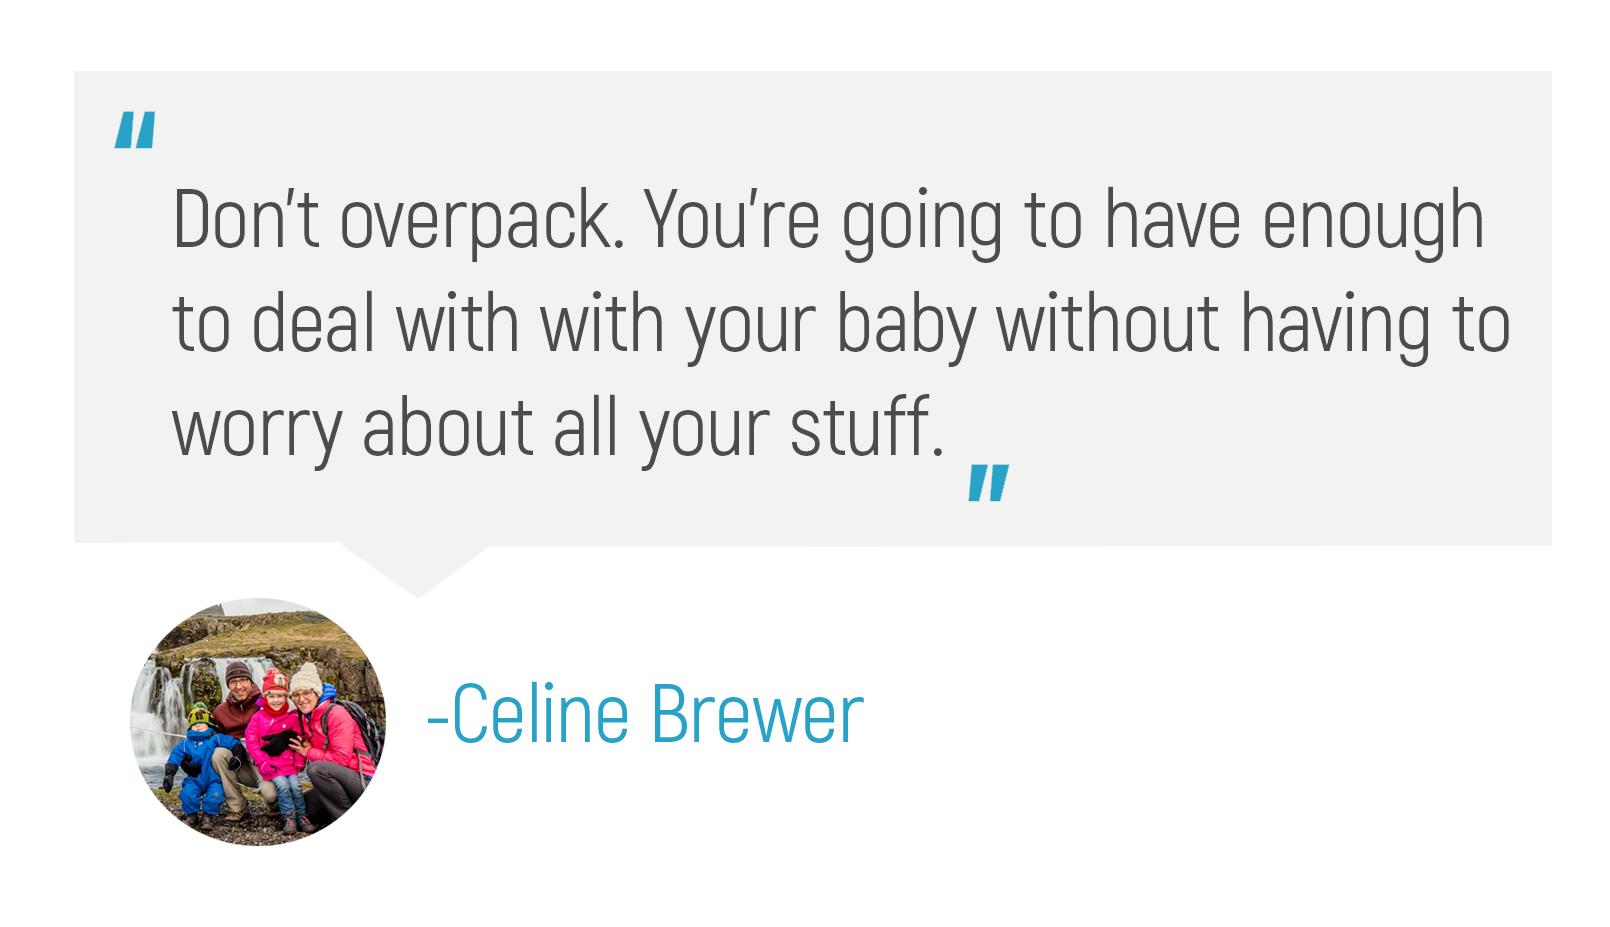 "Don't overpack. You're going to have enough to deal with with your baby without having to worry about all your stuff."